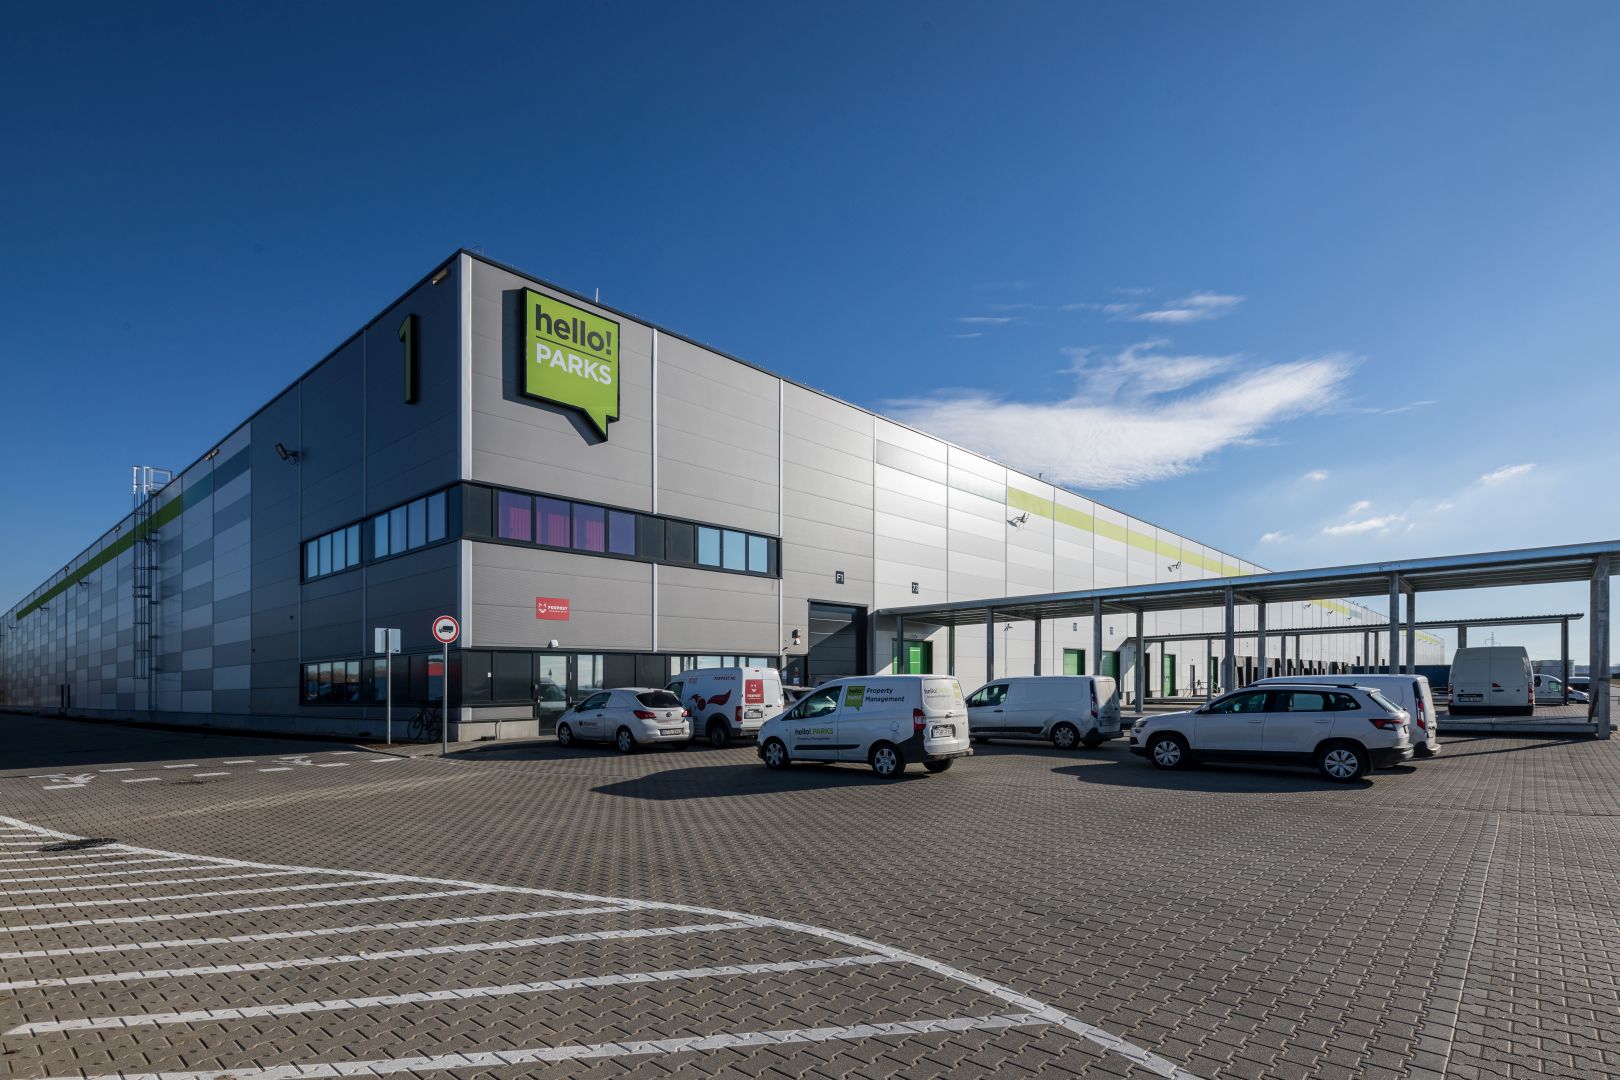 Property-forum.eu: HelloParks reaches full occupancy with first two warehouses